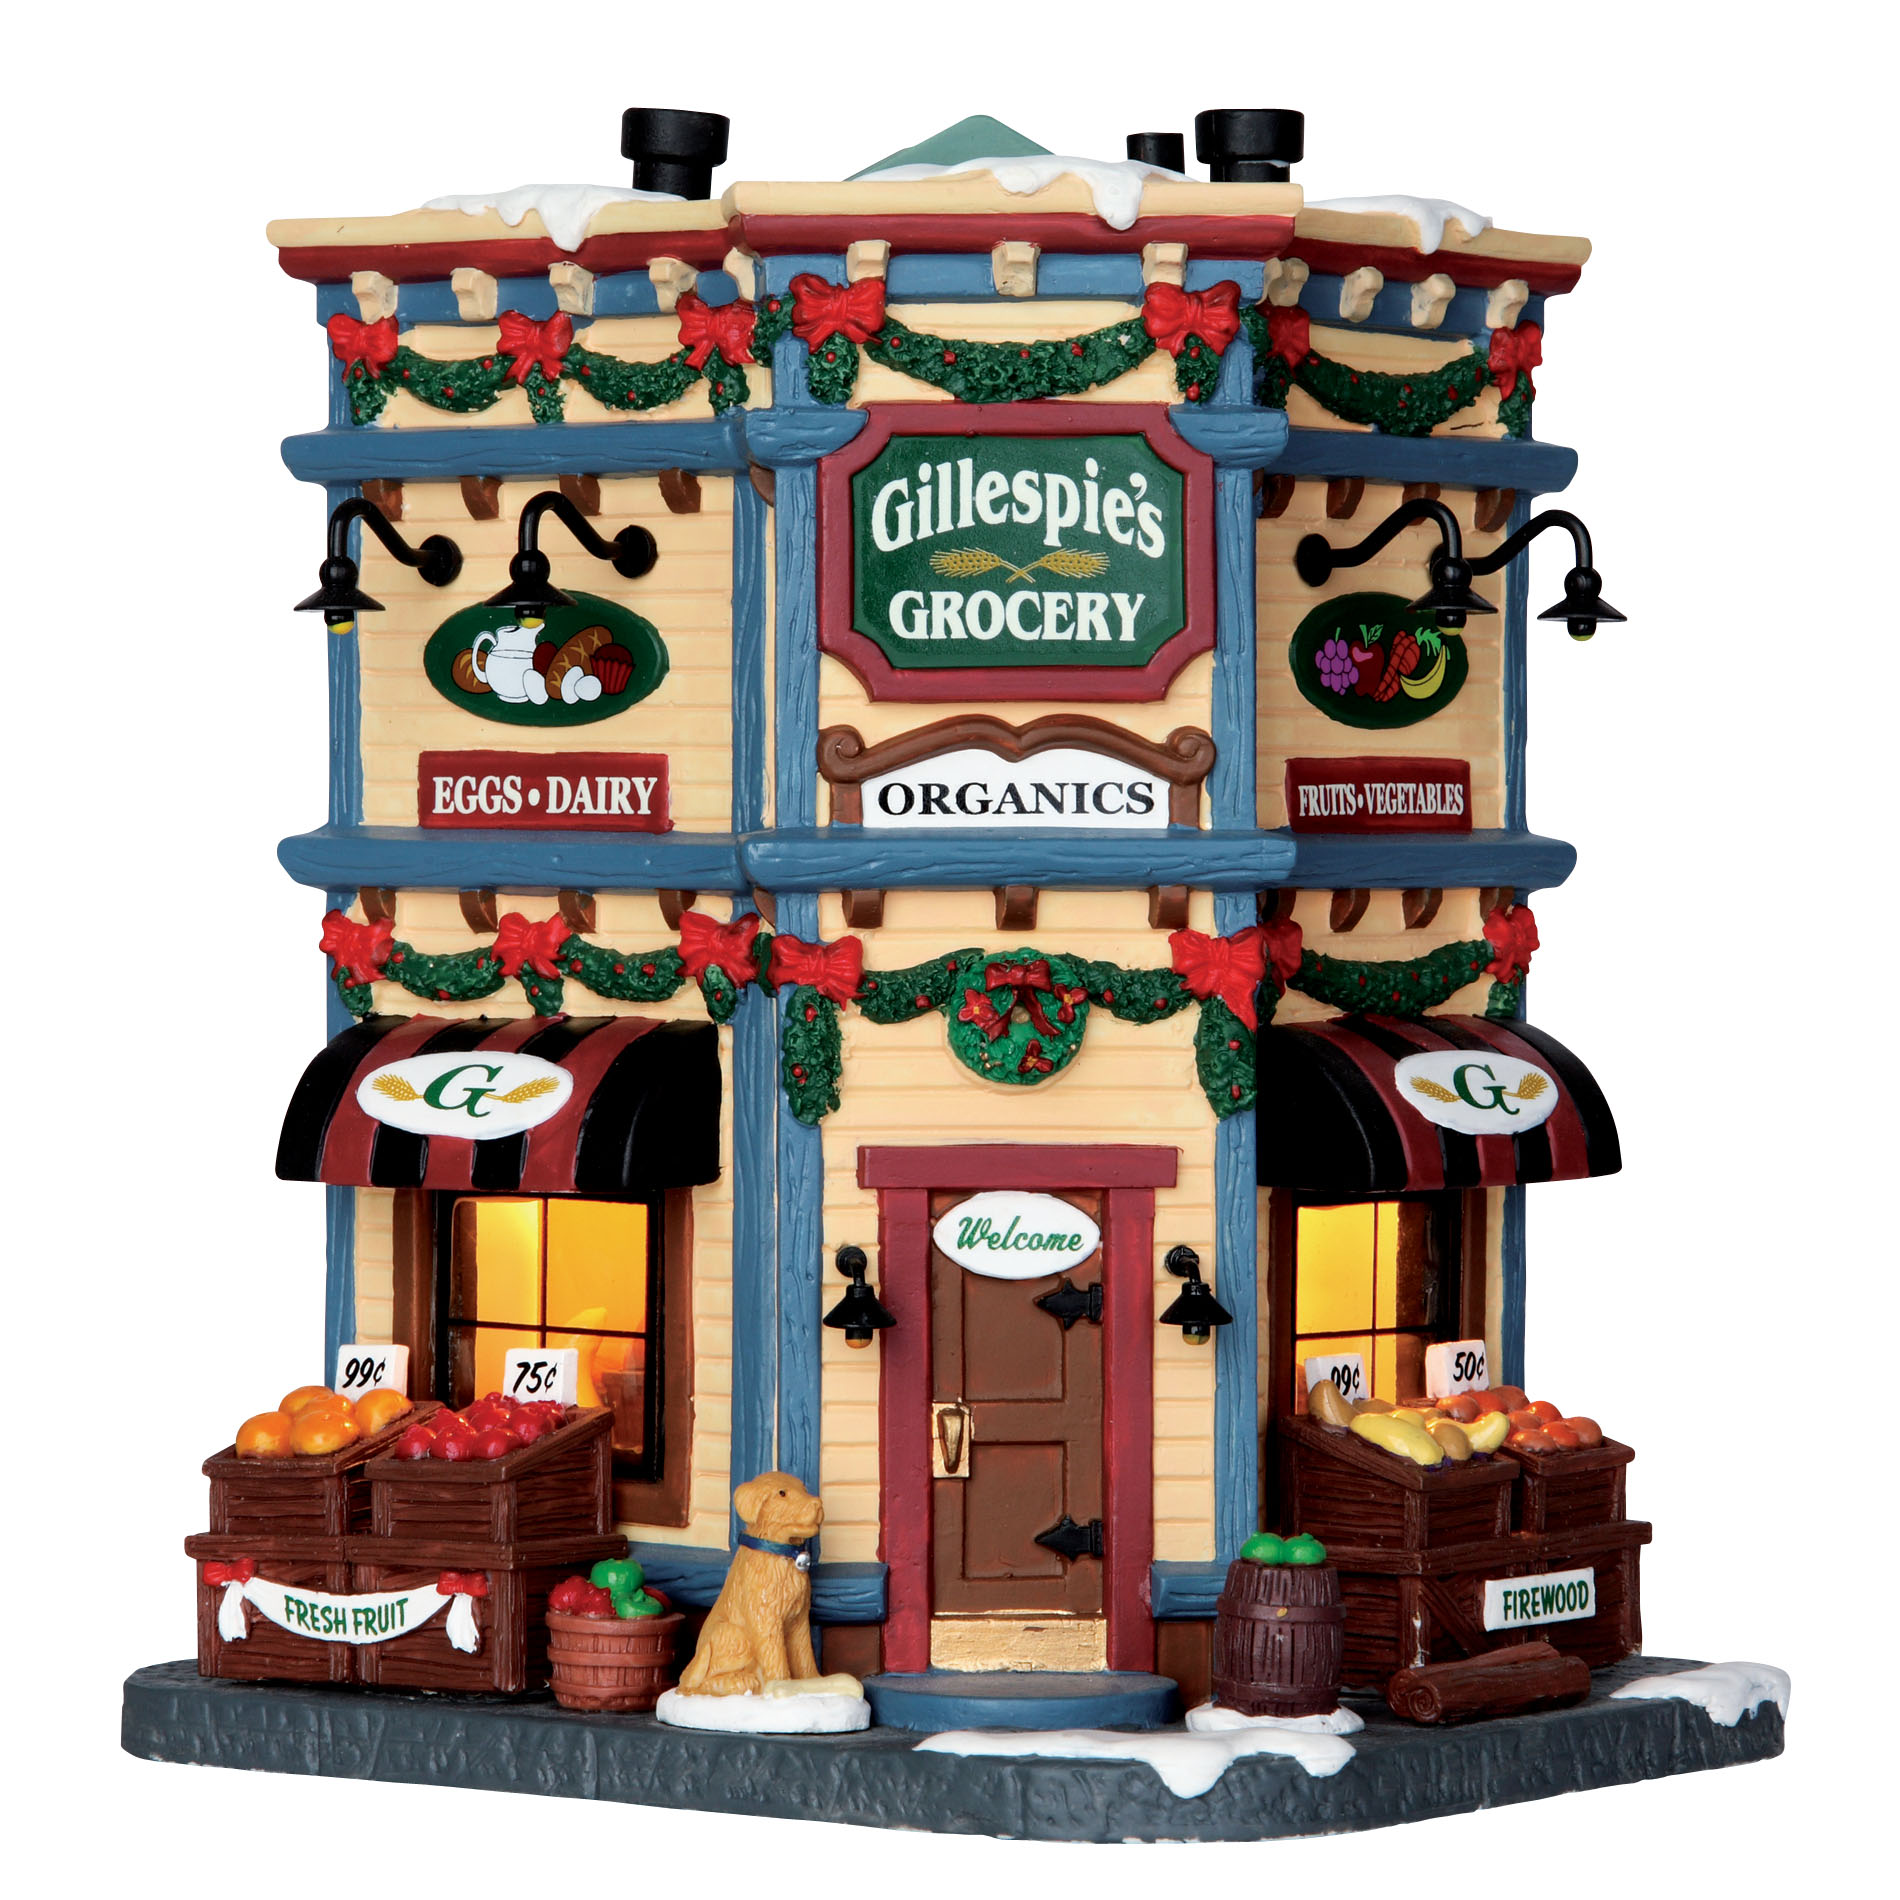 Lemax Village Collection Christmas Village Building, Gillespie'S Grocery